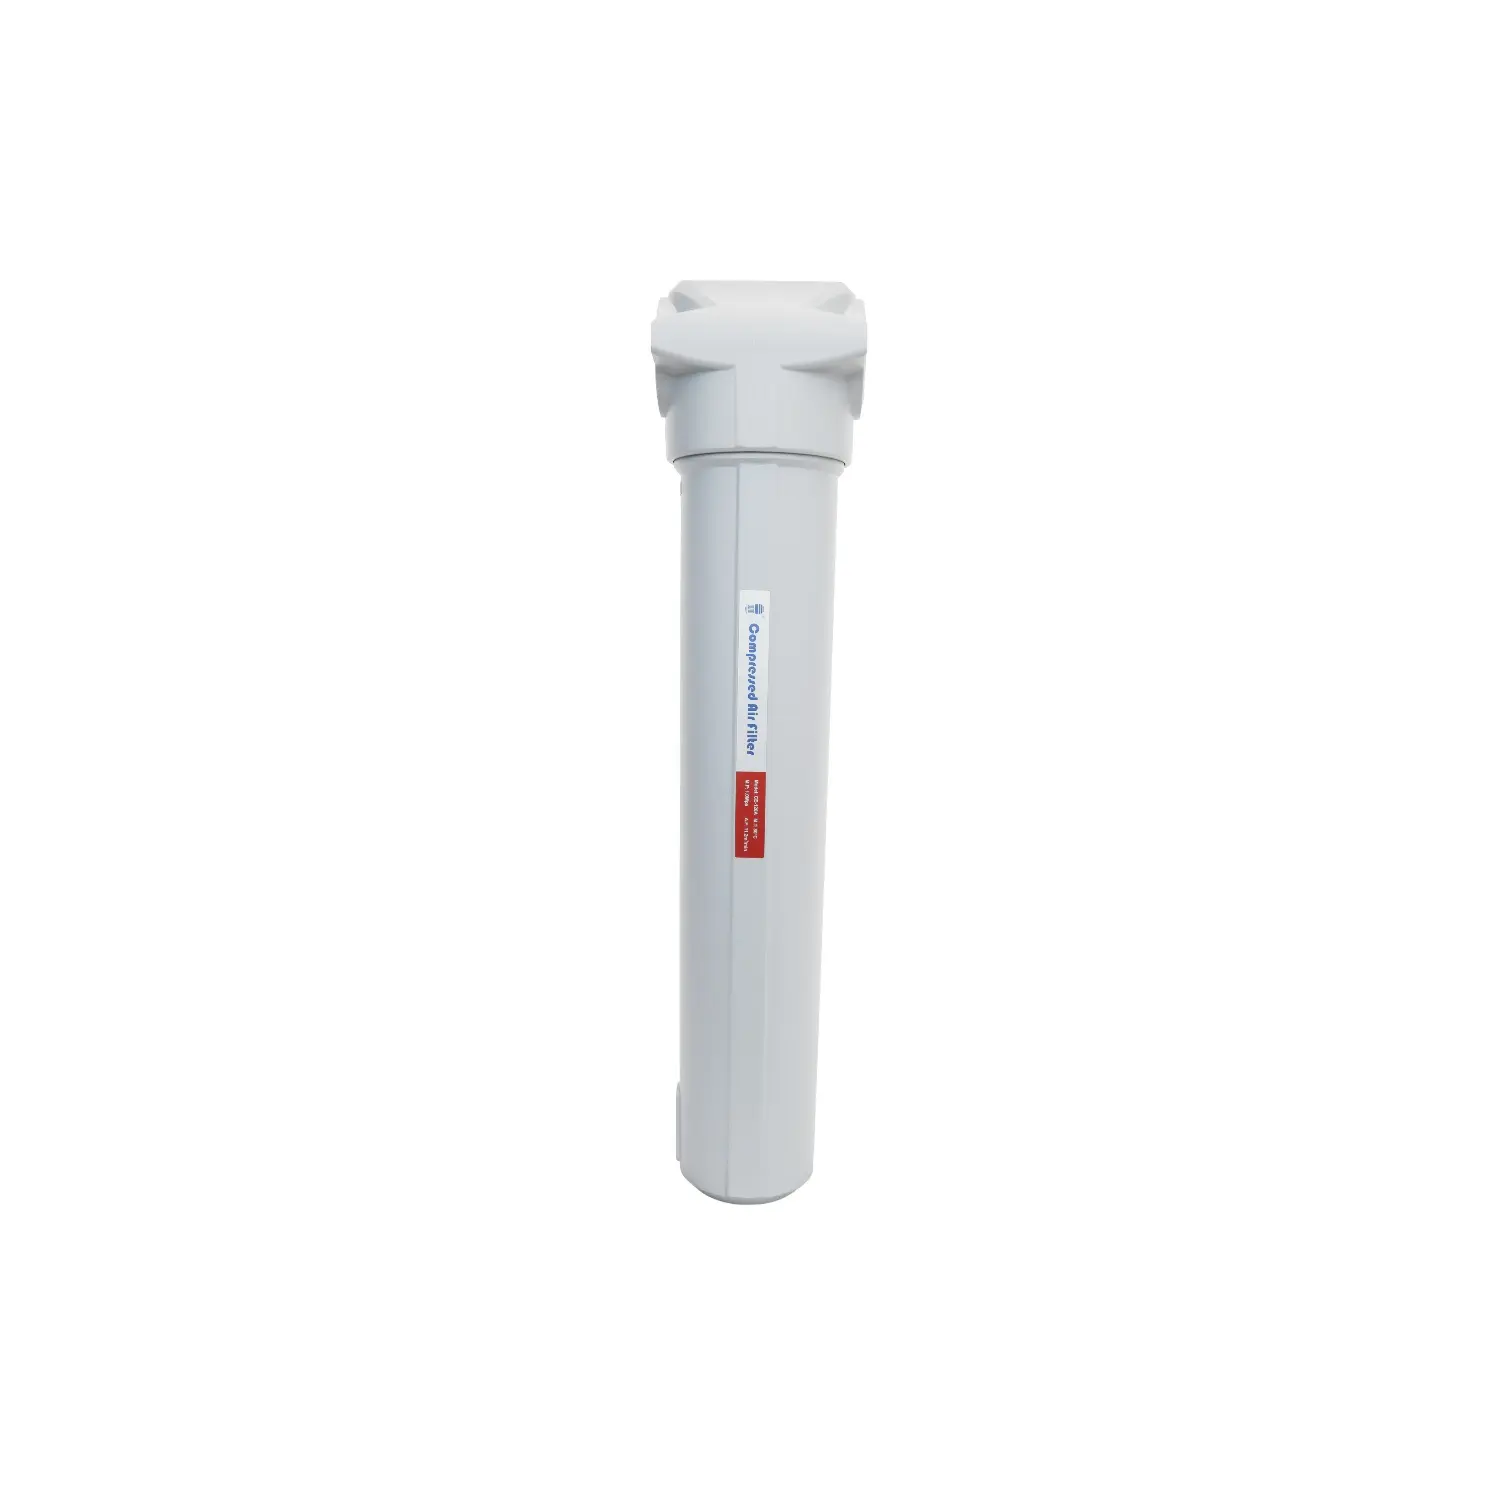 China Yineng Factory Wholesales High Quality CE Series 1.0 Mpa Compressed Air Filter